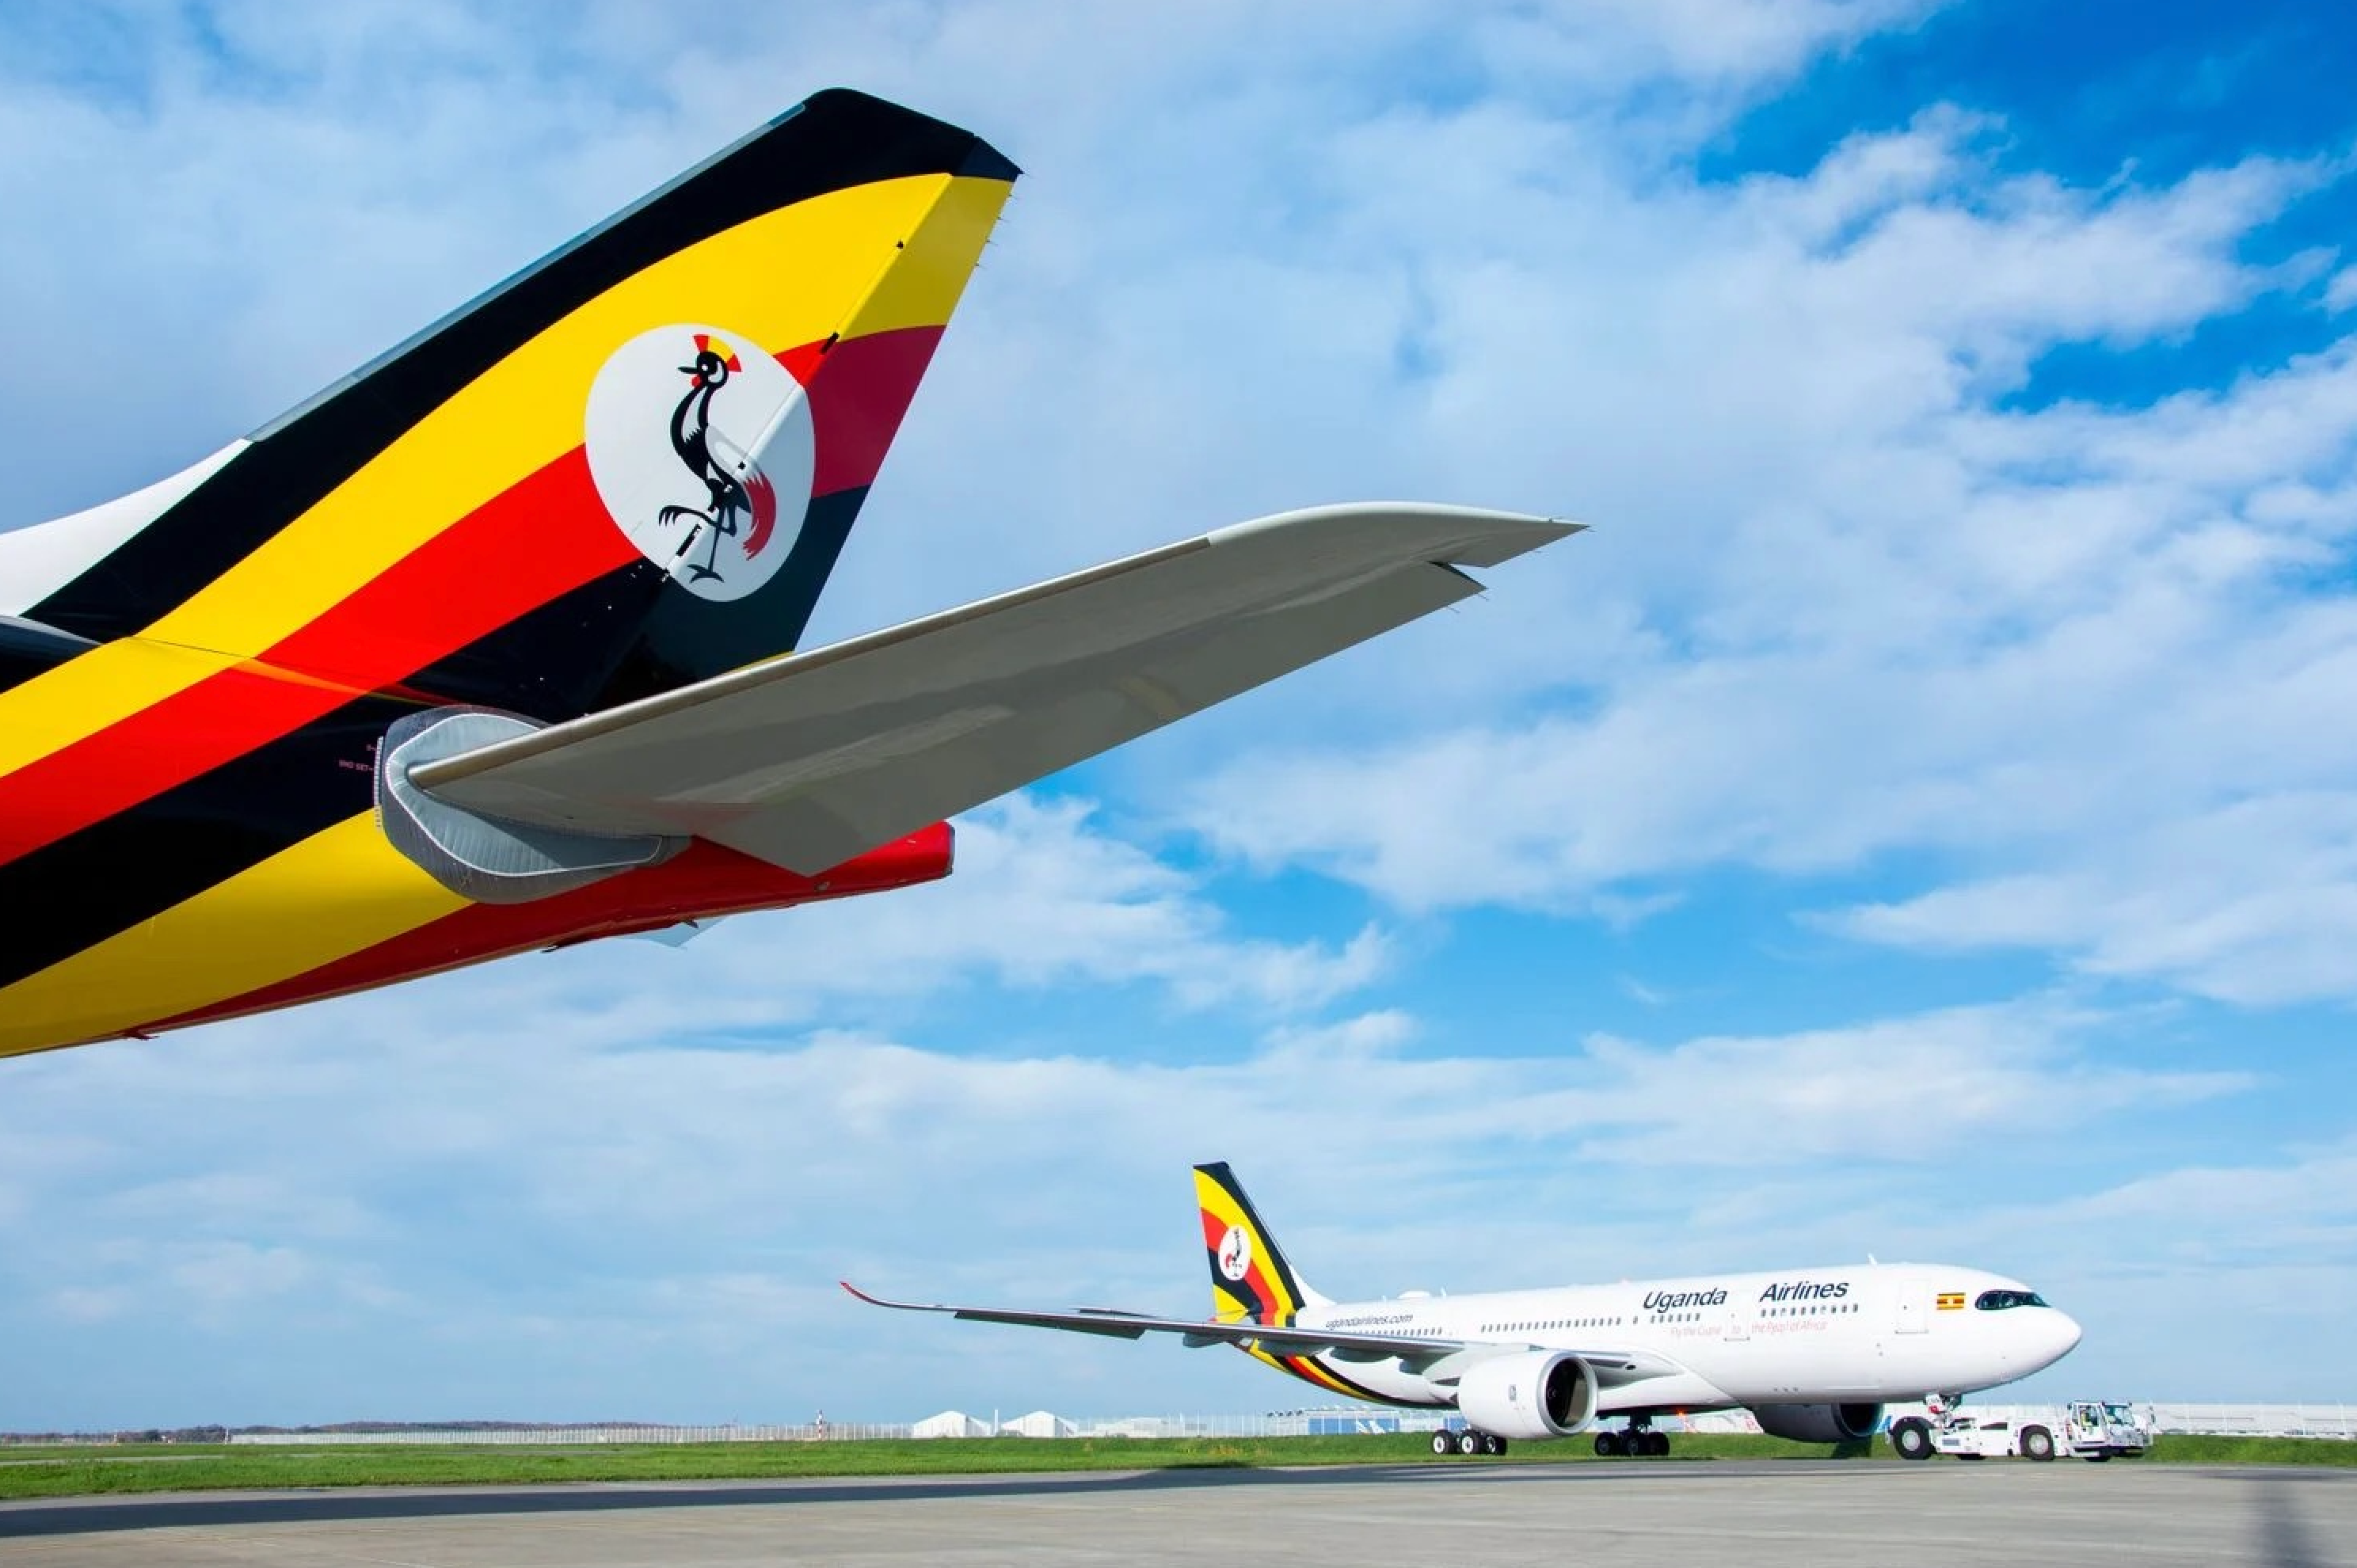 Uganda Airlines A330-800neo